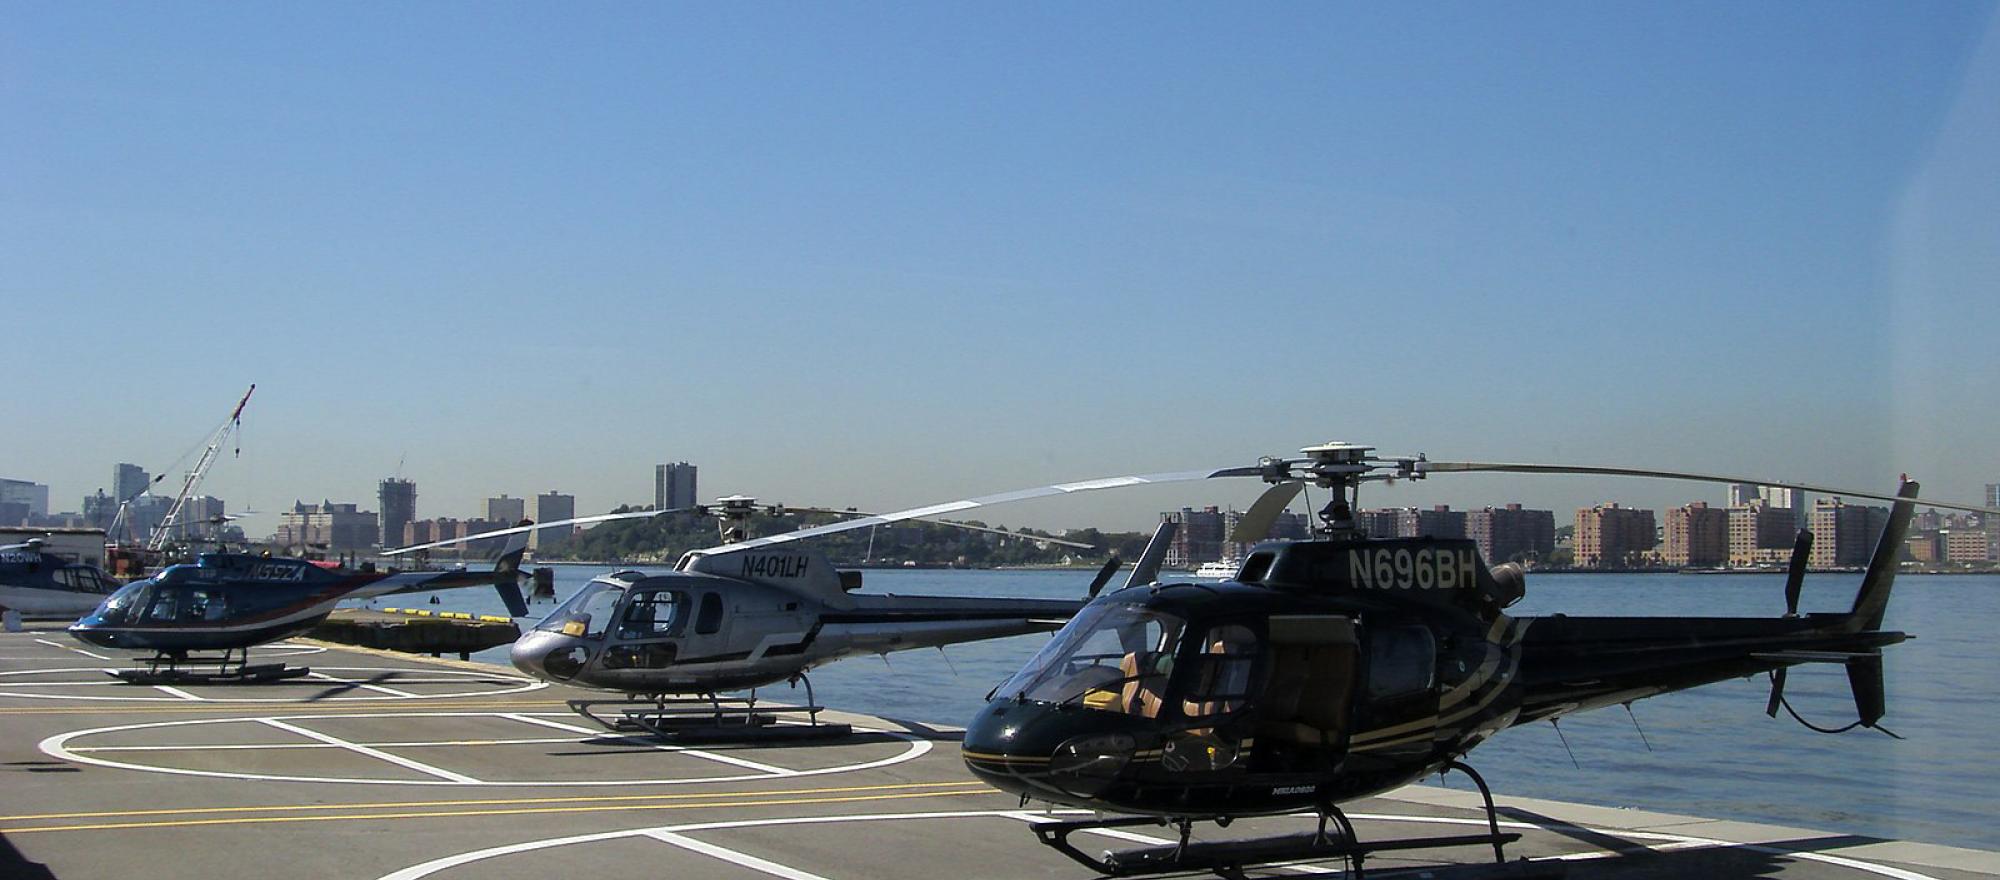 Helicopters on helipad at the West 30th Street heliport in New York City